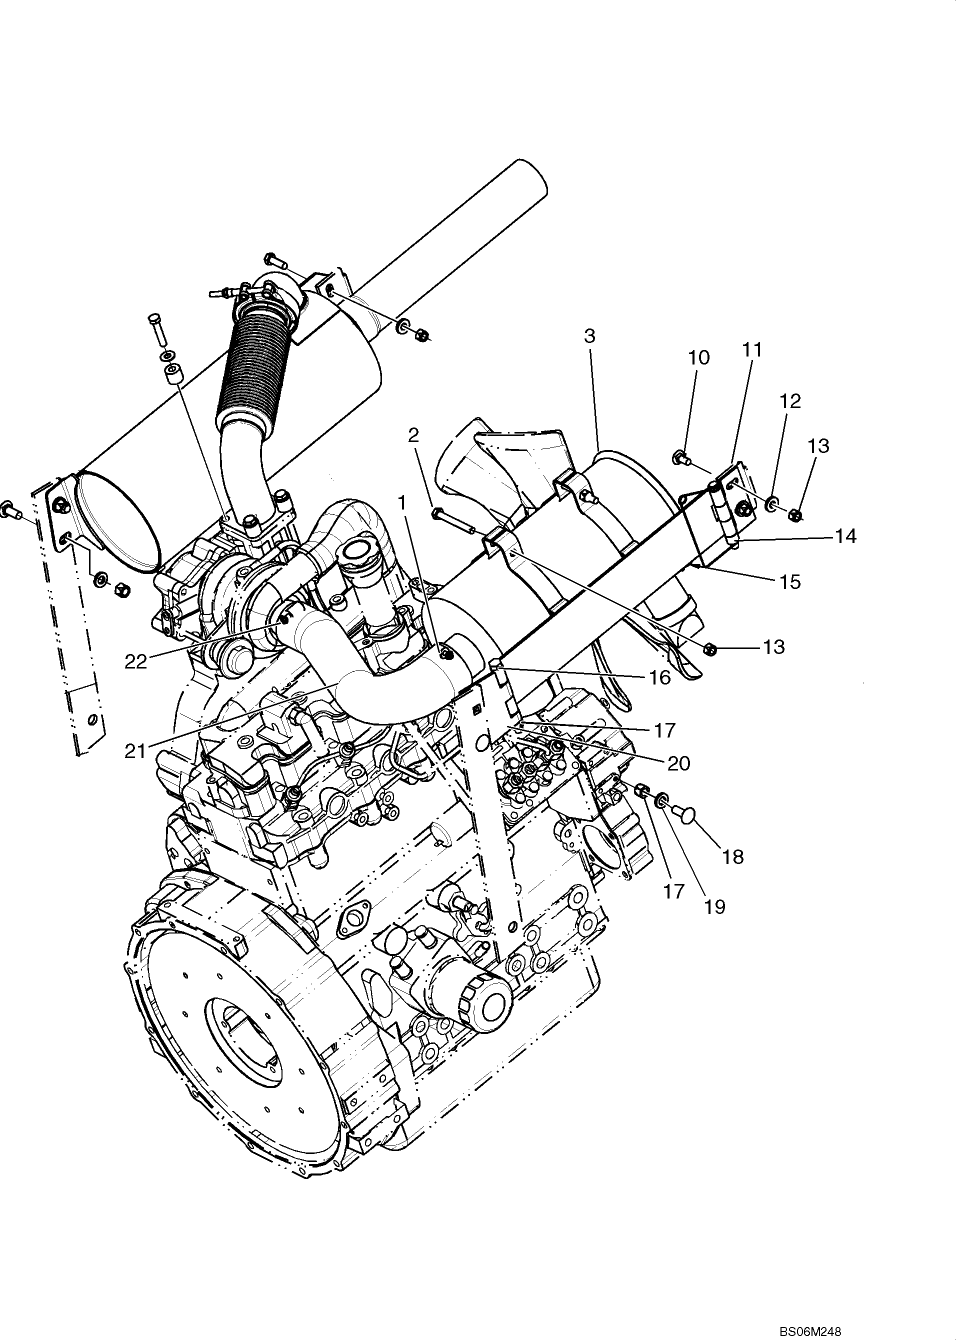 02-02 AIR CLEANER - ENGINE